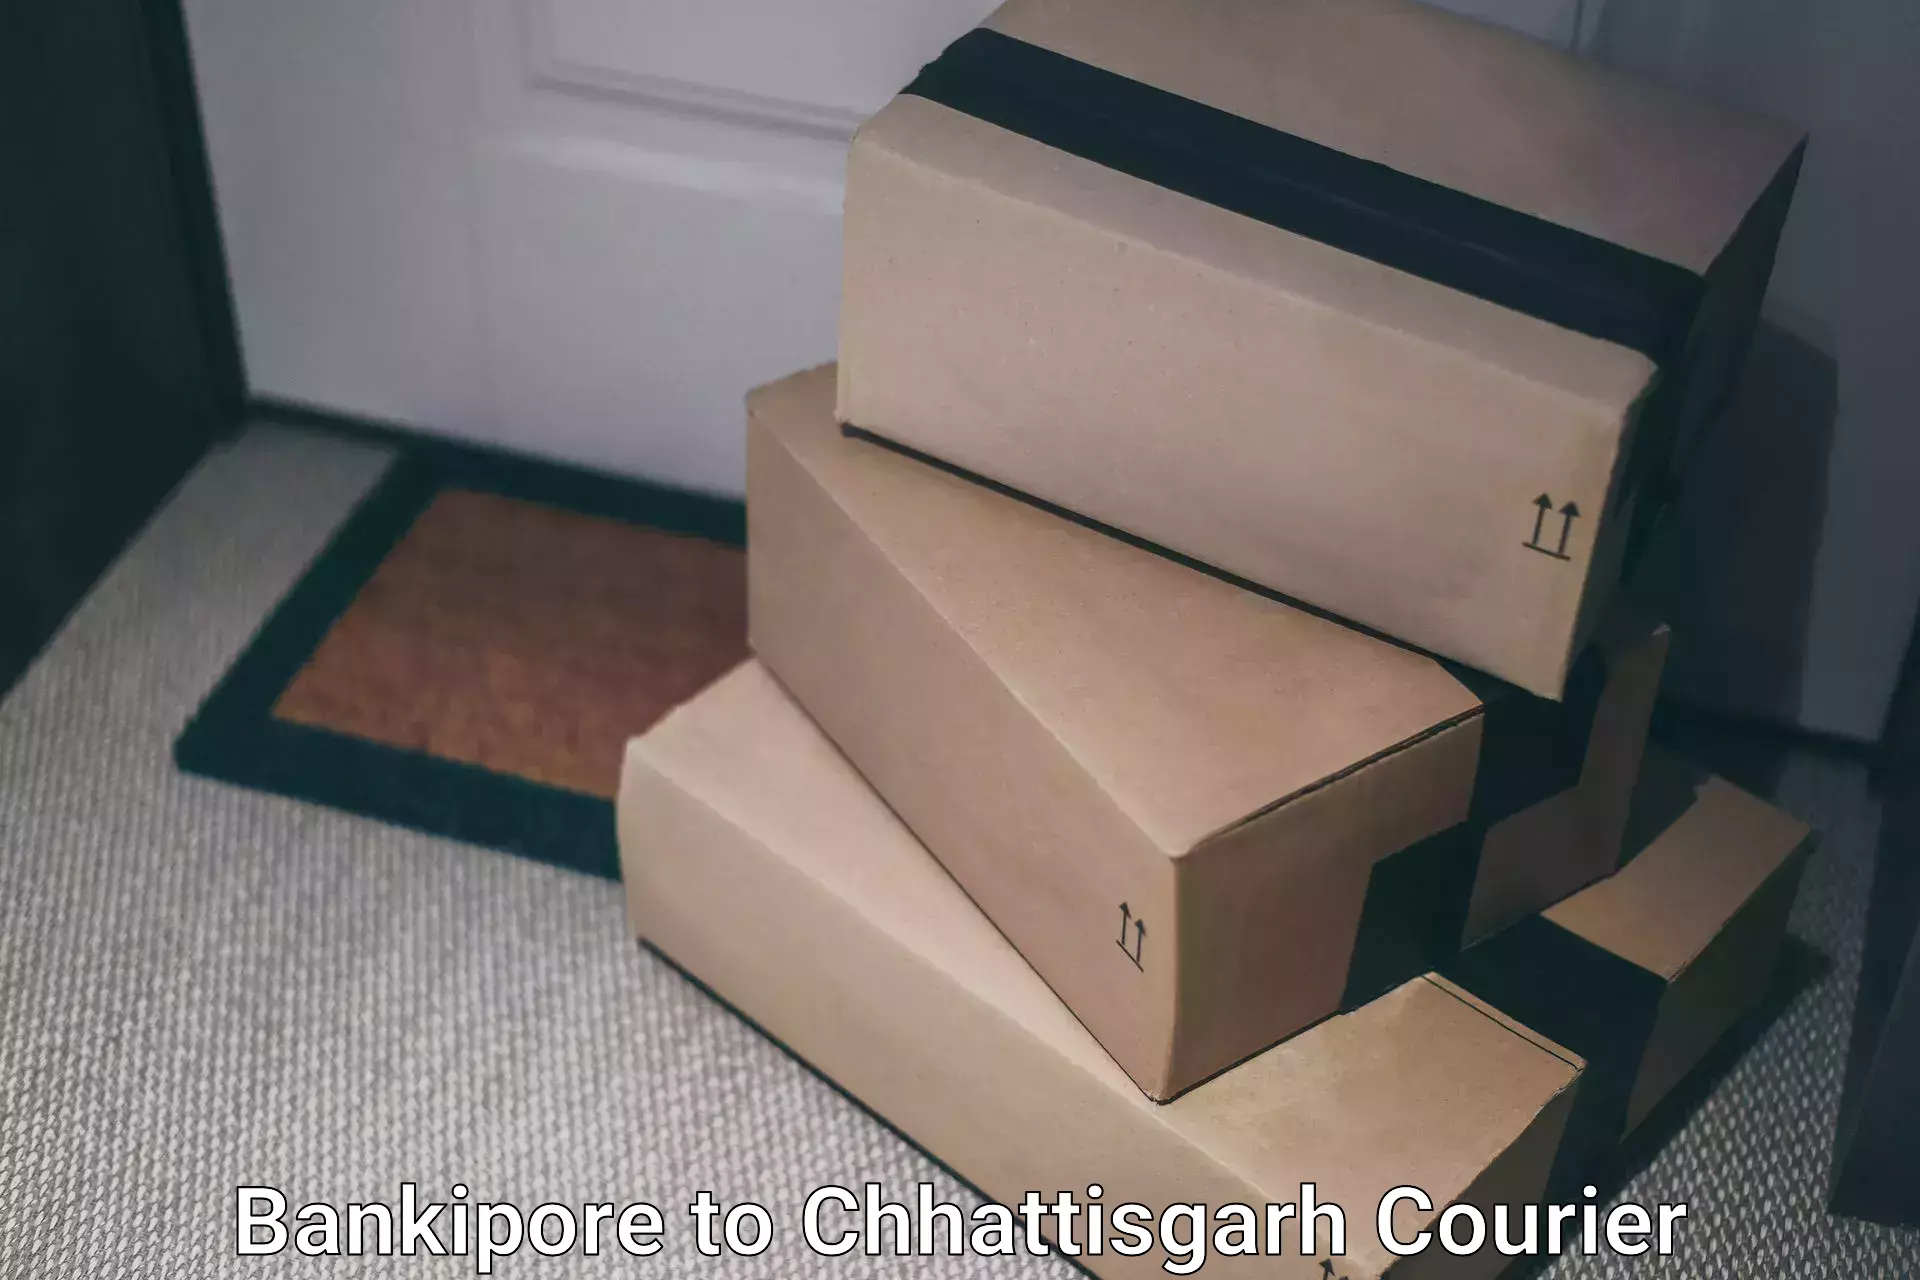 Secure package delivery Bankipore to Raigarh Chhattisgarh